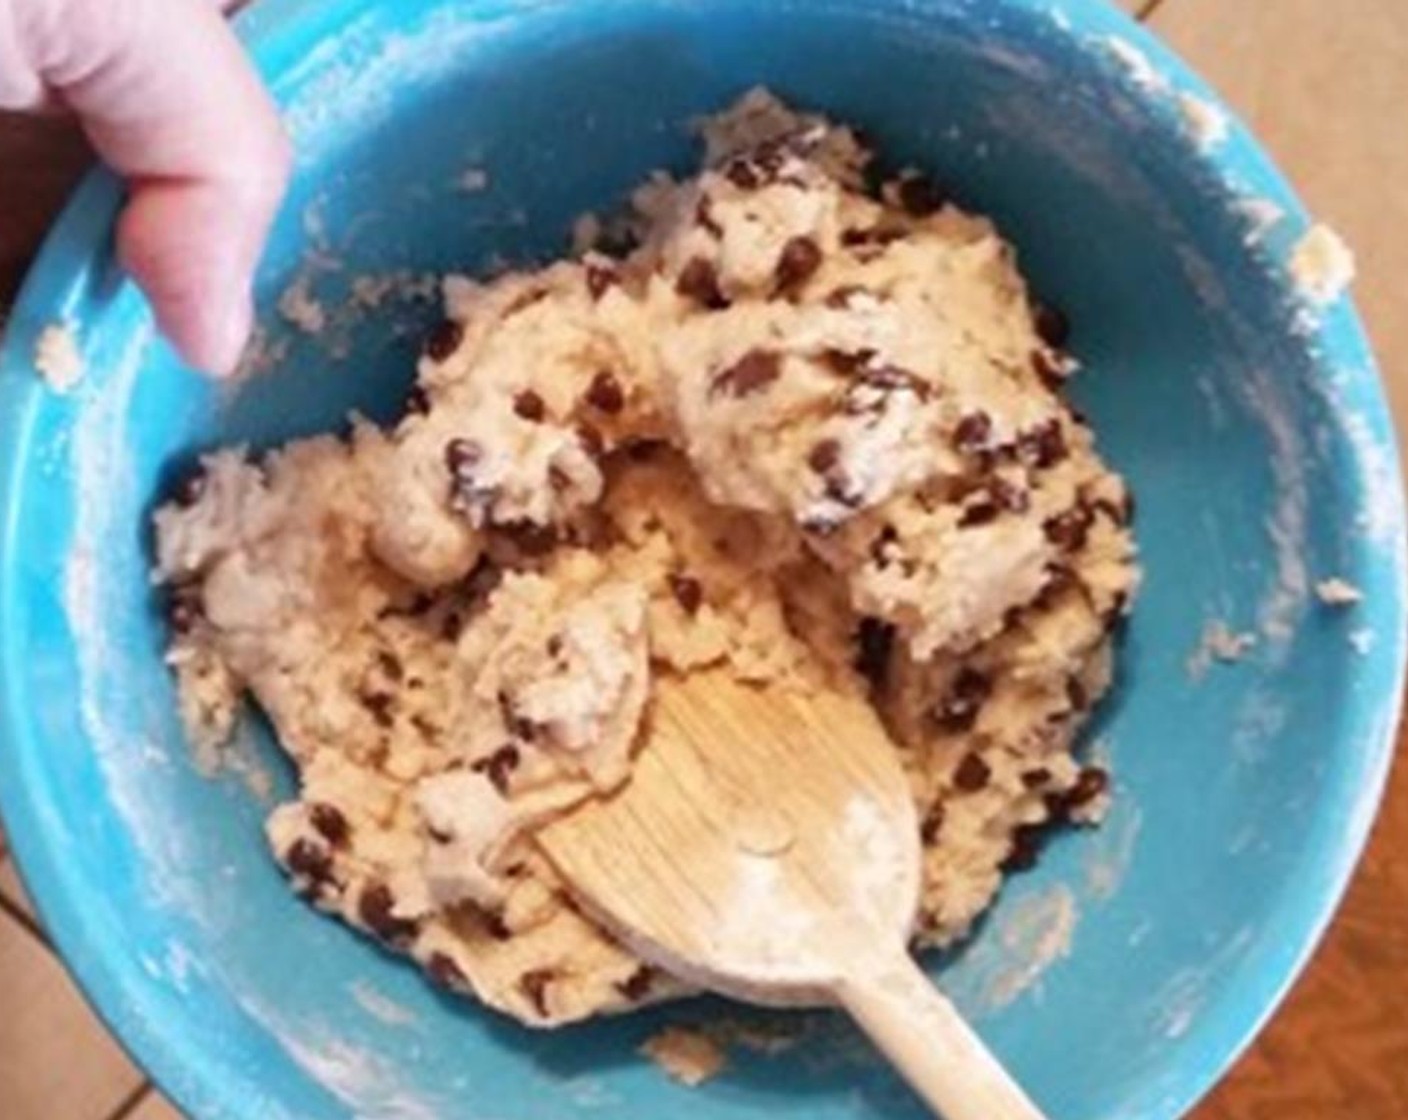 step 1 In a bowl, mix together Brown Sugar (1/3 cup), Granulated Sugar (1/3 cup),Butter (1/4 cup), Vanilla Extract (1 tsp), Milk (3 Tbsp), All-Purpose Flour (1 cup), and Mini Chocolate Chips (1 cup).